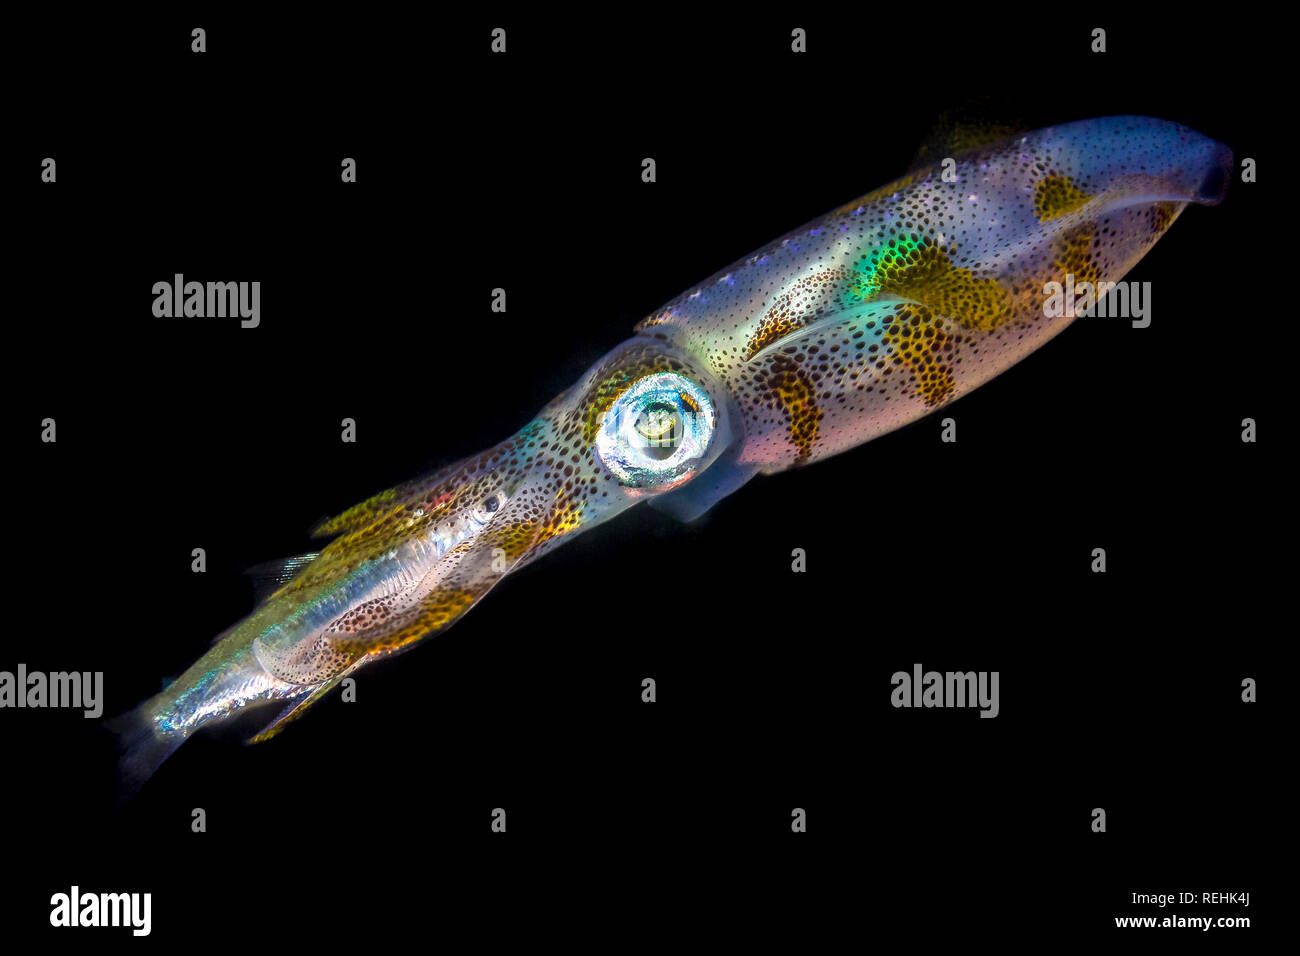 bigfin reef squid or oval squid, Sepioteuthis lessoniana, feeding on fish, Bitung, Lembeh Strait, Celebes Sea, North Sulawesi, Indonesia, Indo-Pacific Stock Photo